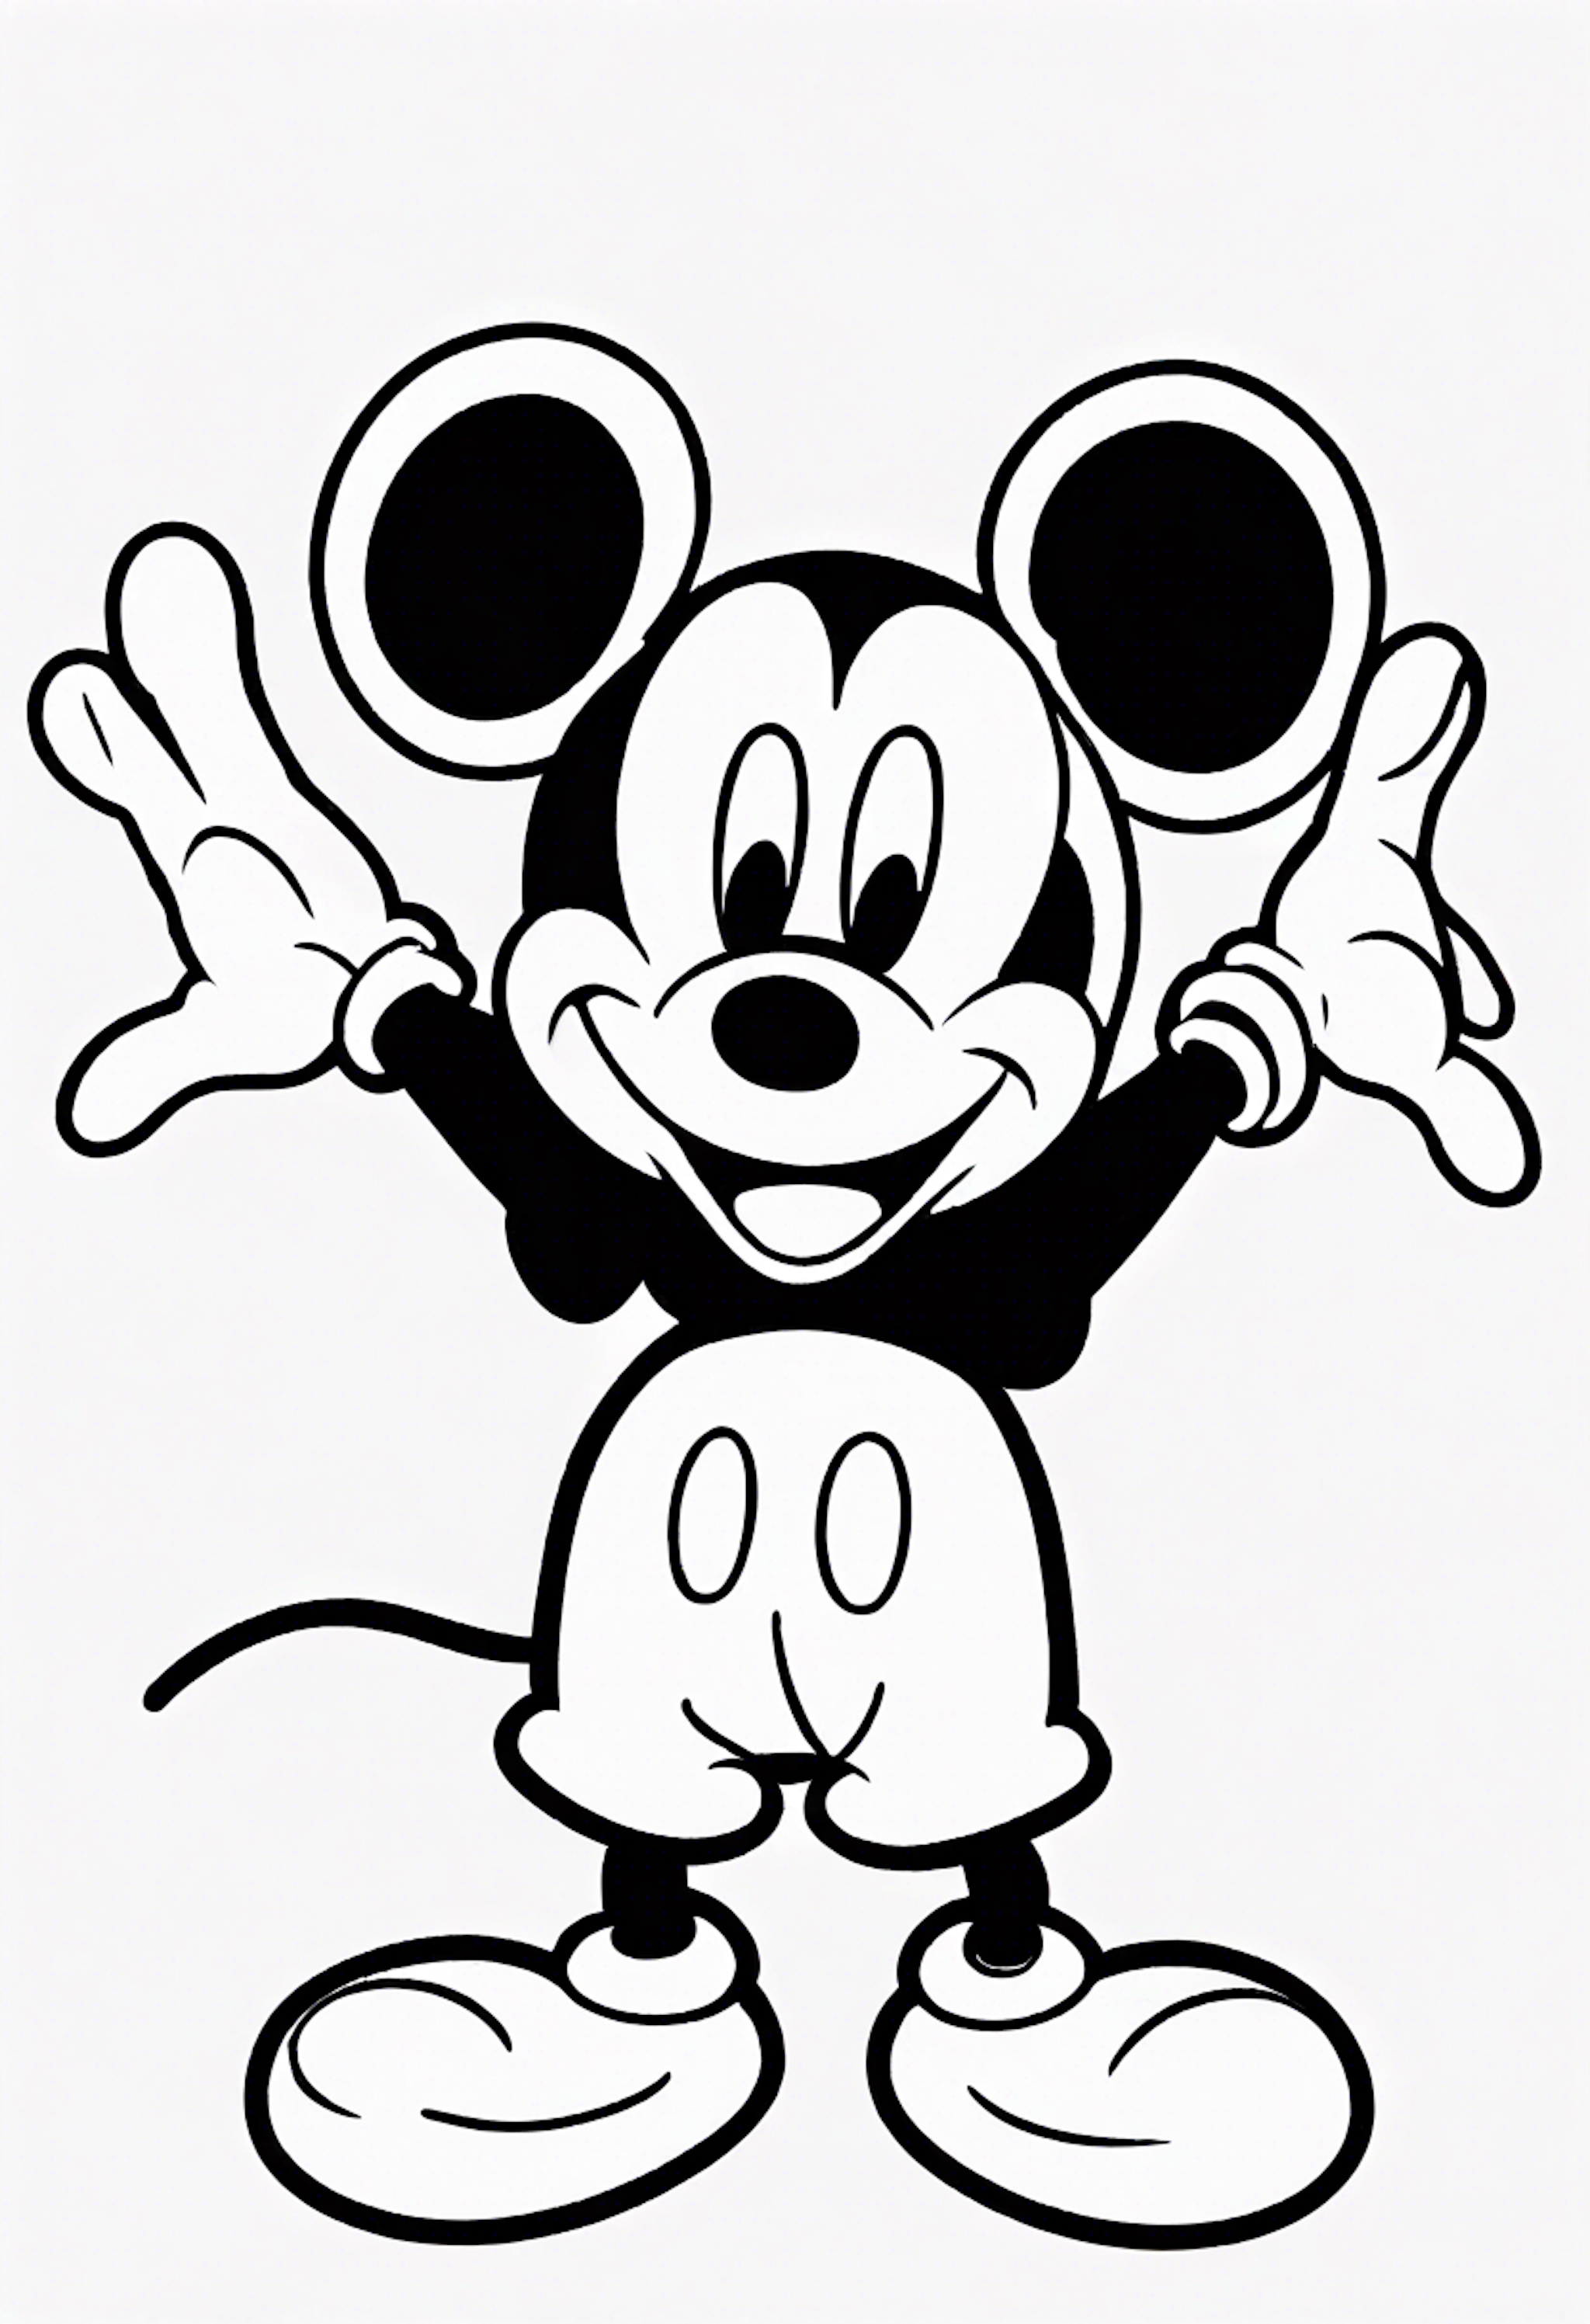 A coloring page for 1 Mickey Mouse coloring pages